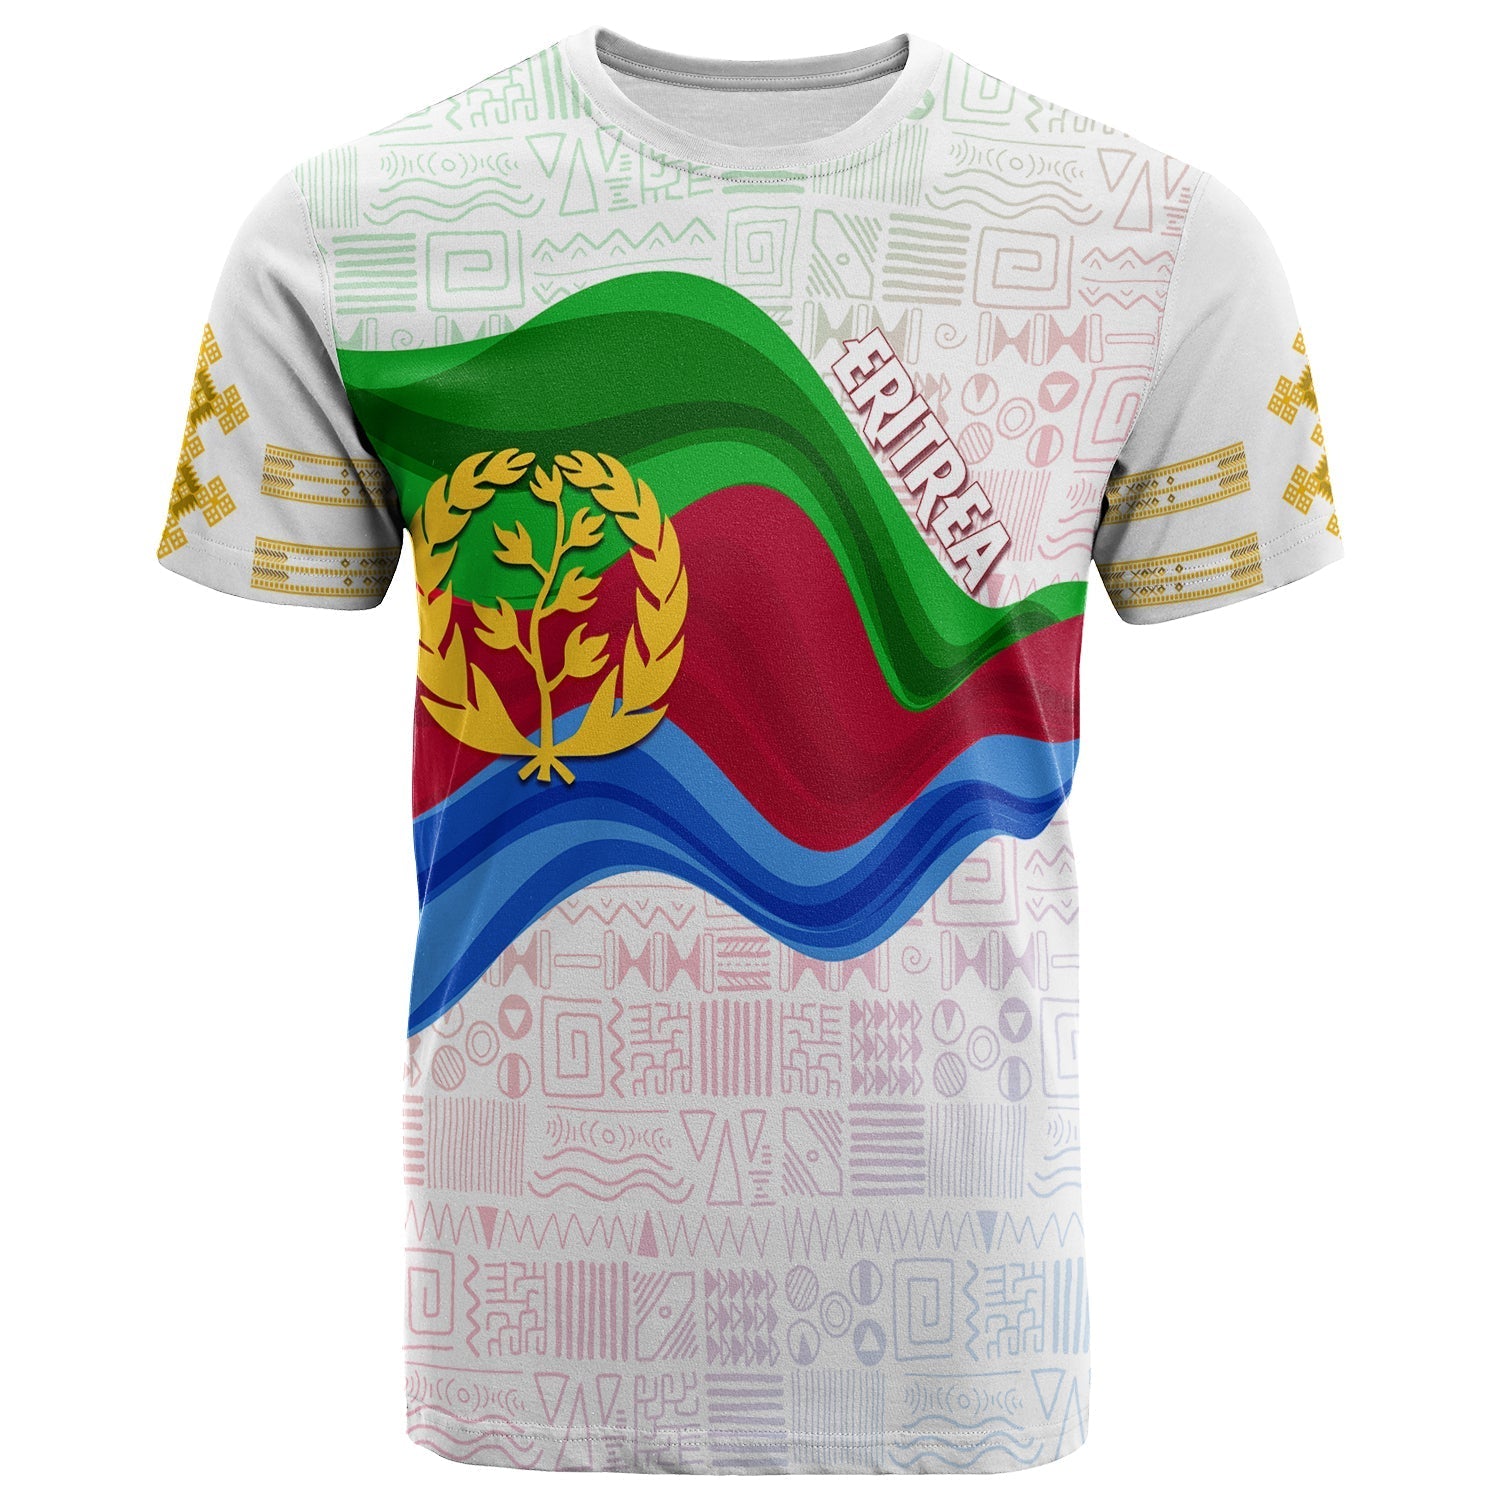 eritrea-independence-day-t-shirt-ethnic-african-pattern-white